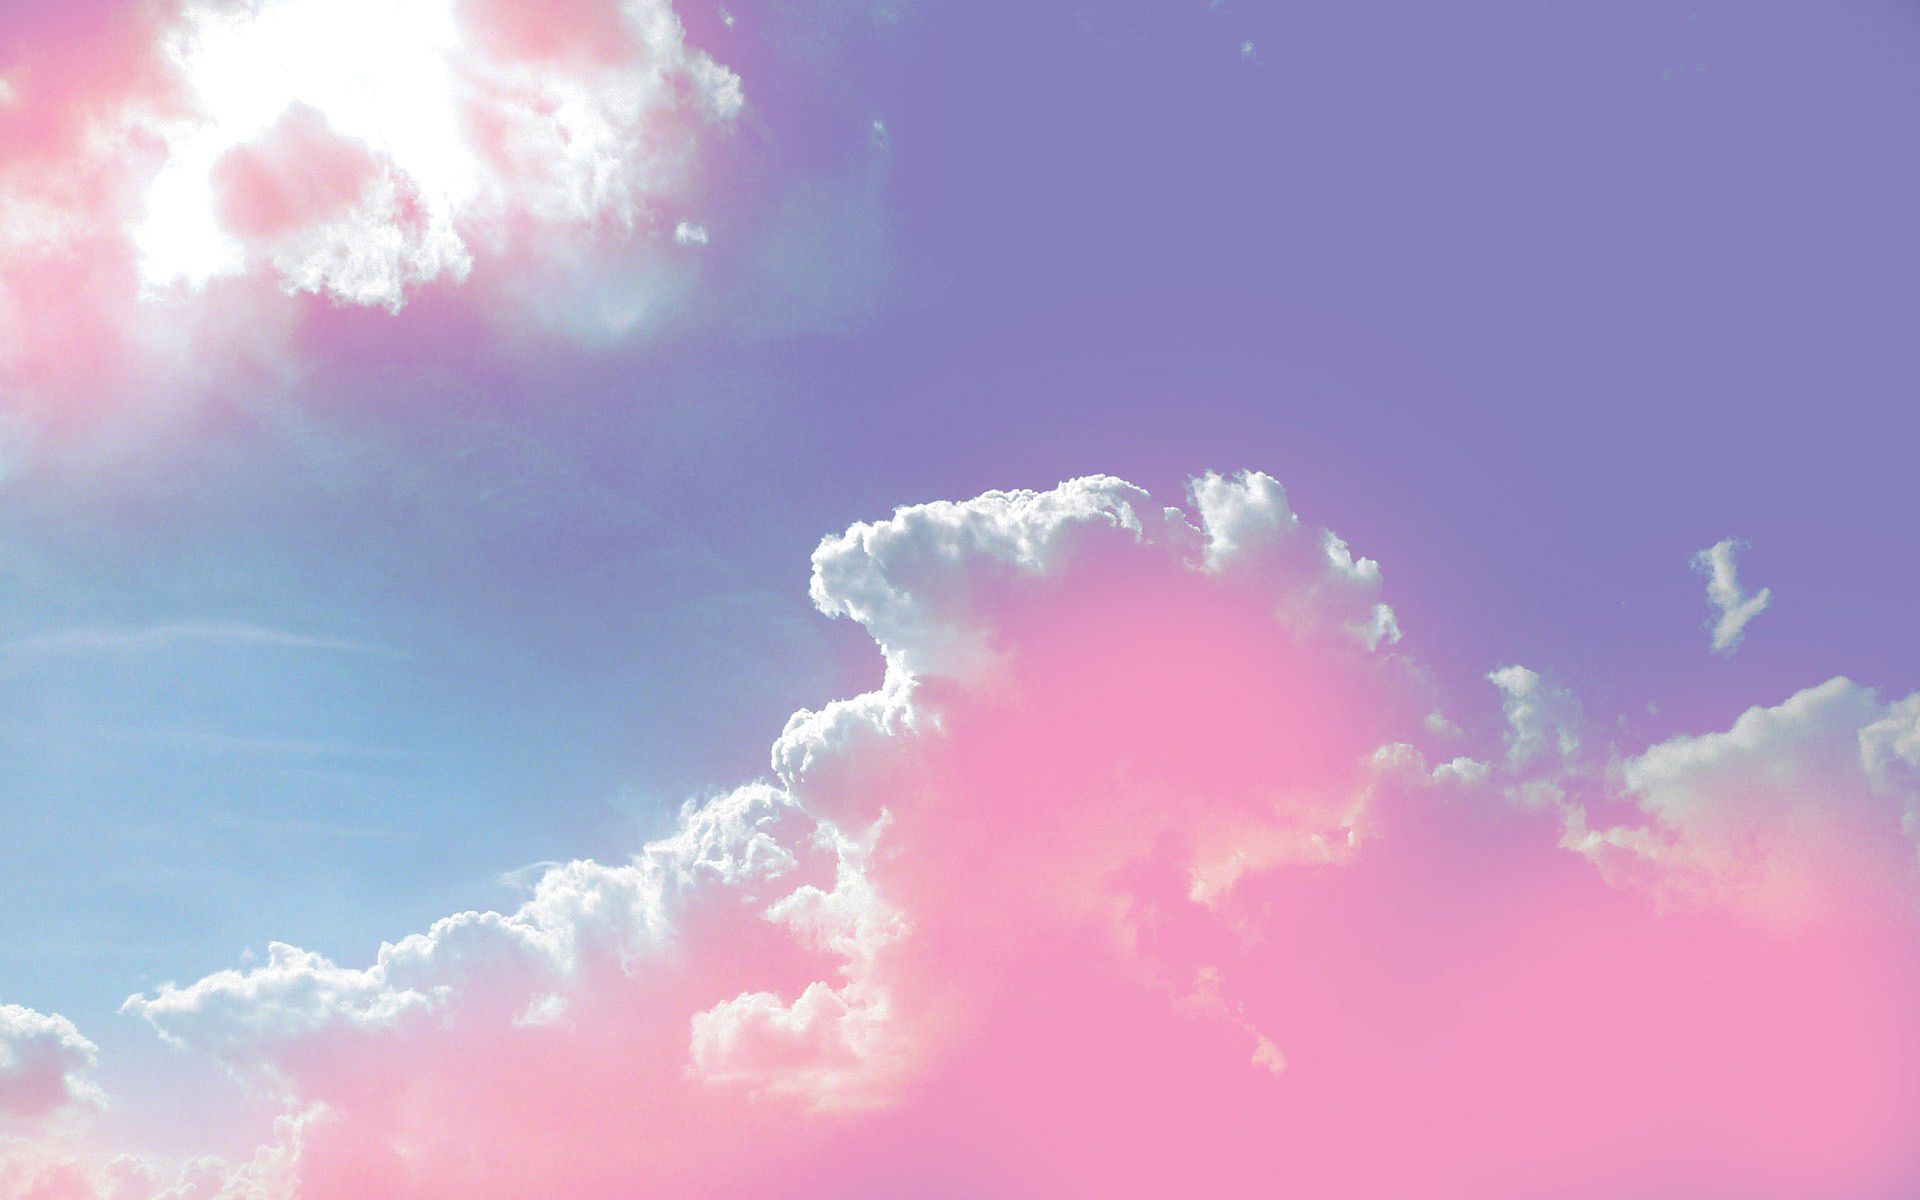 iPhone Wallpaper On Unorganized Pink Clouds